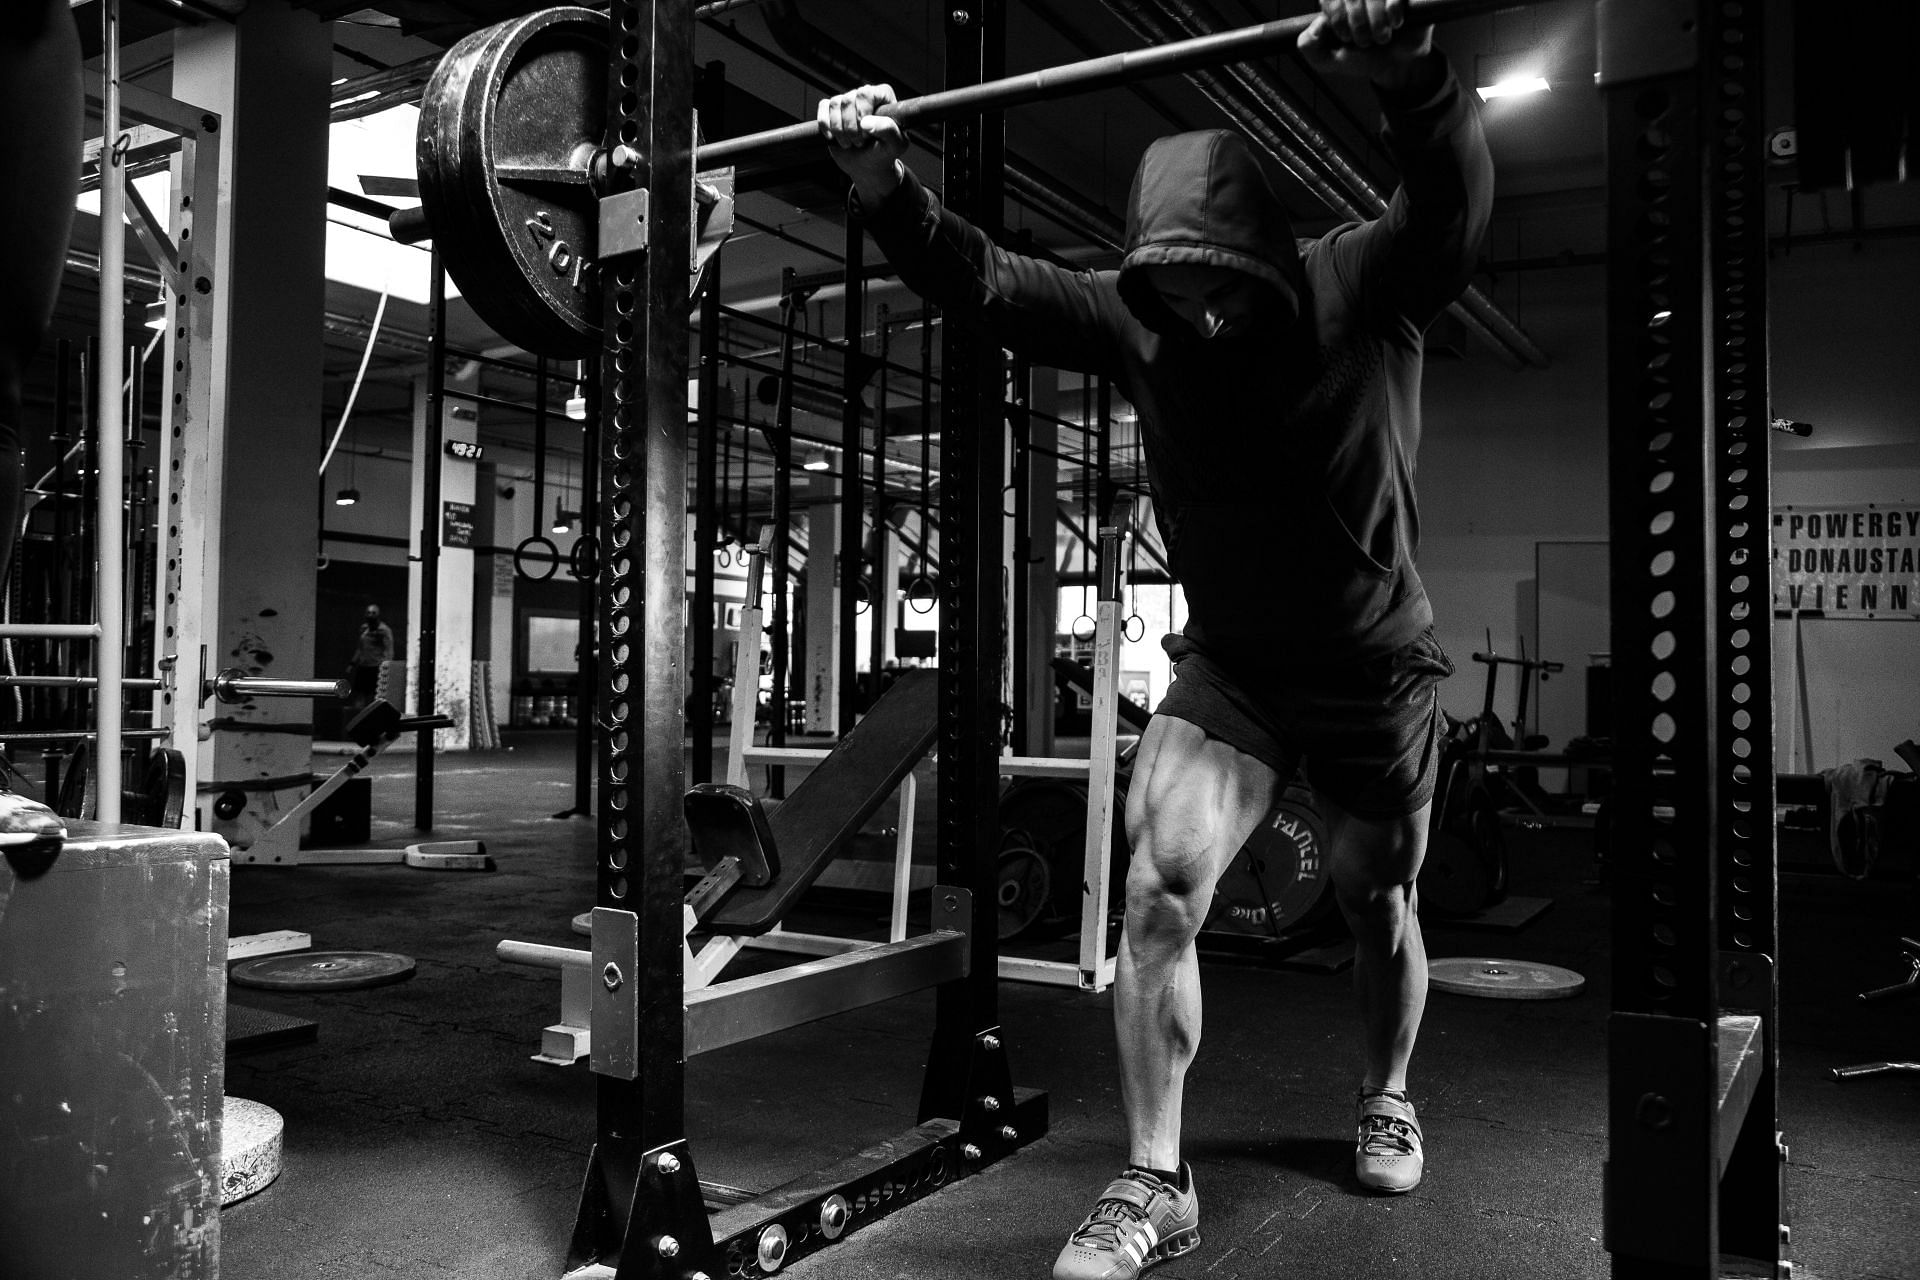 Black and white image of a Man wearing a hoodie standing behind a loaded barbell on a squat rack.